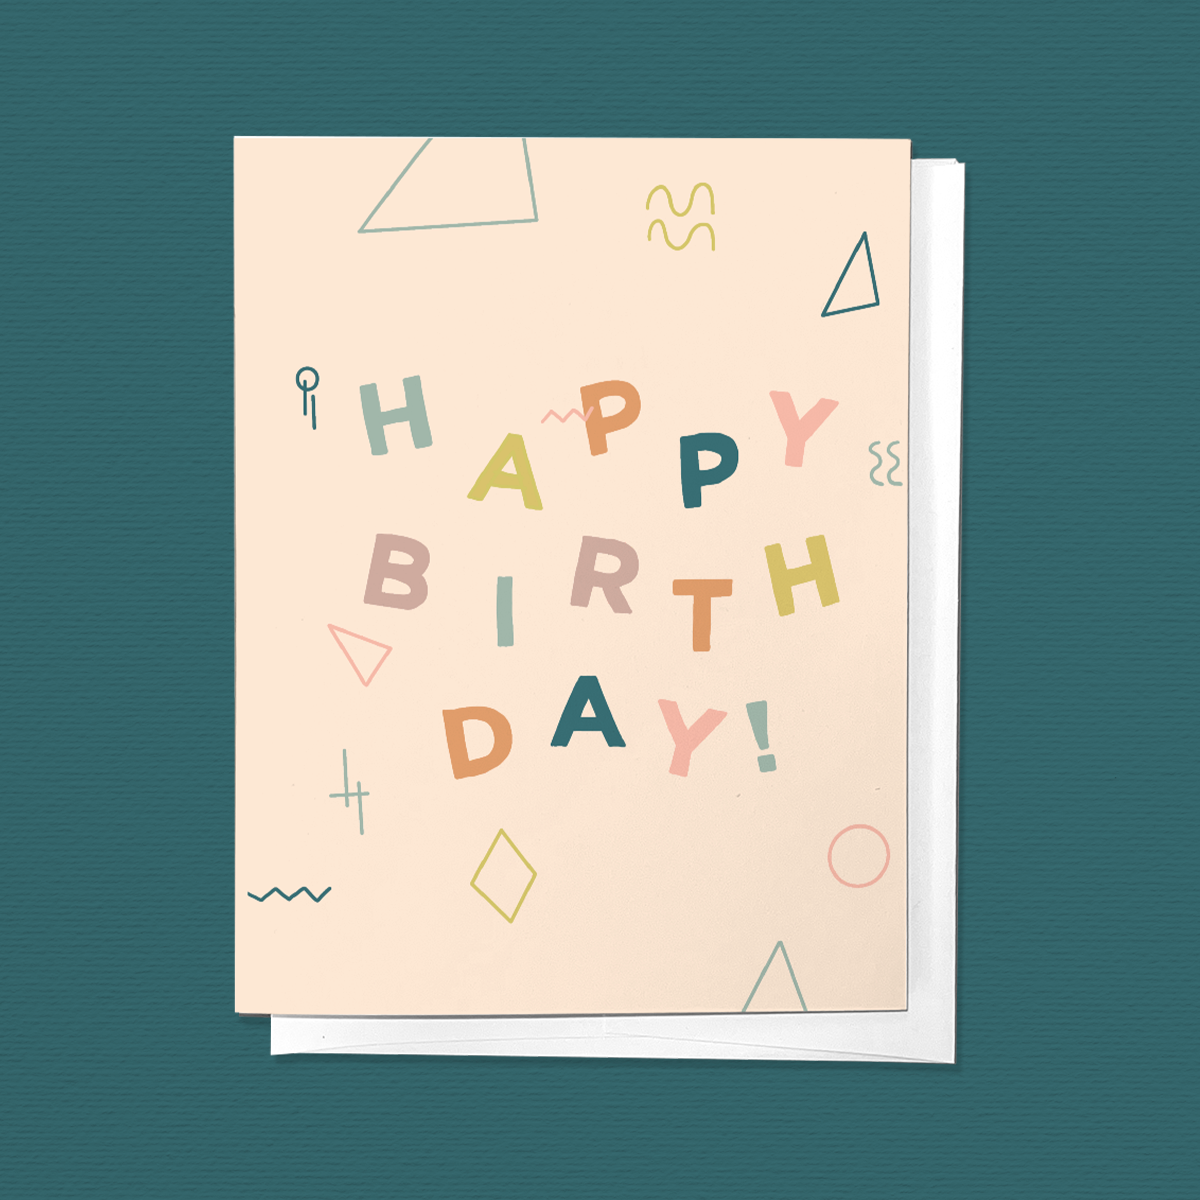 Have a Birthday Bash, Funny, Colorful Fun Greeting Card